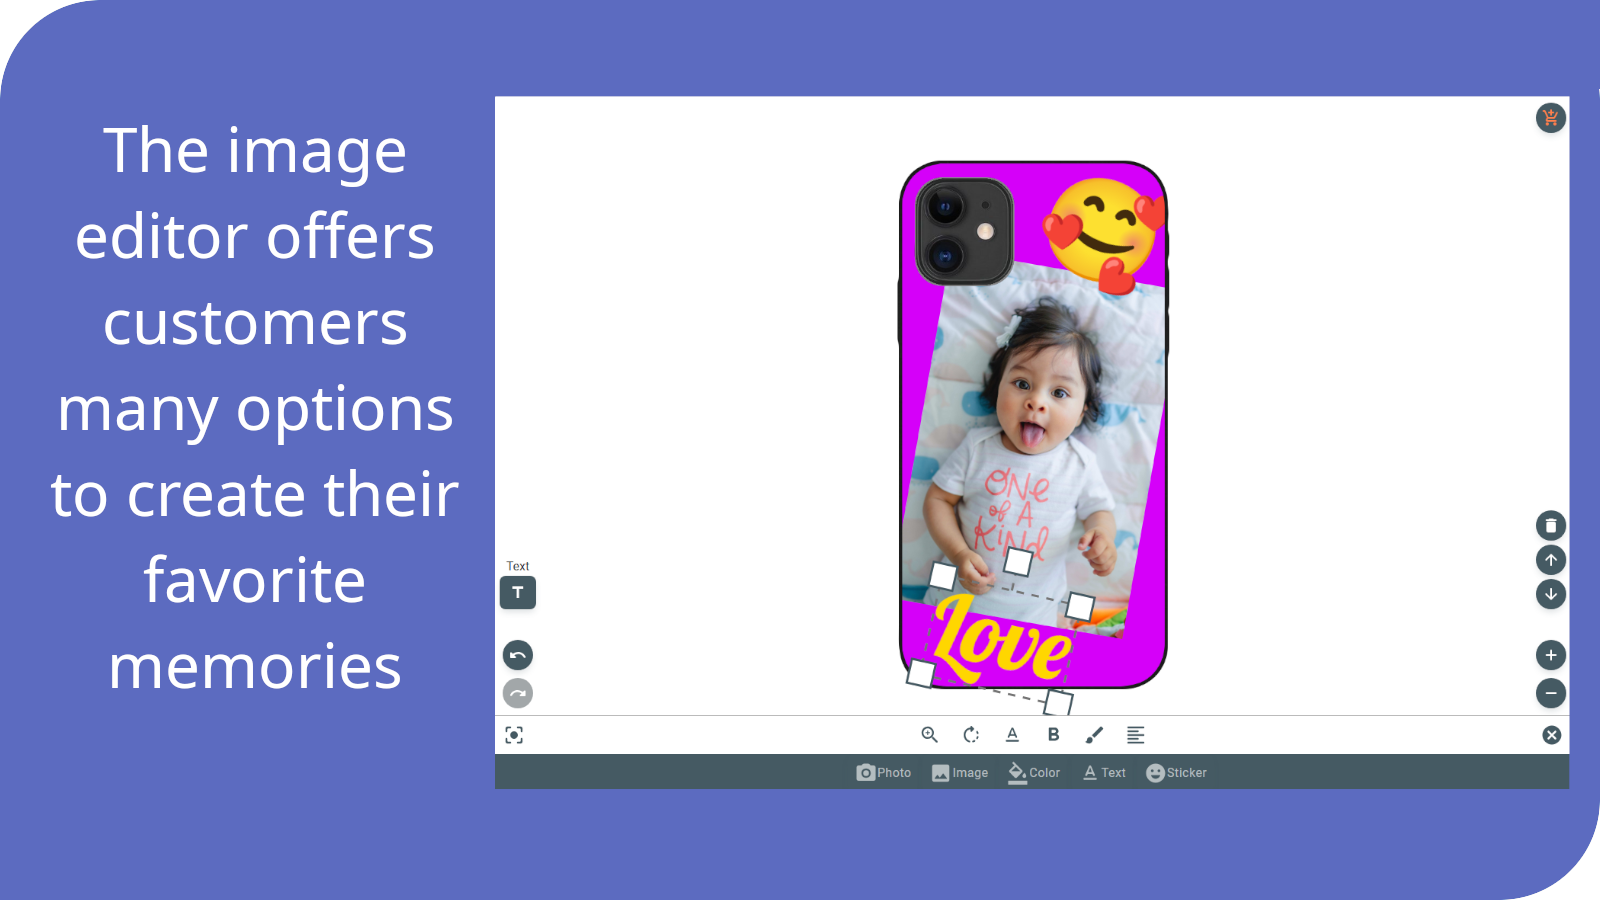 Image editor offers customers many options for personalization